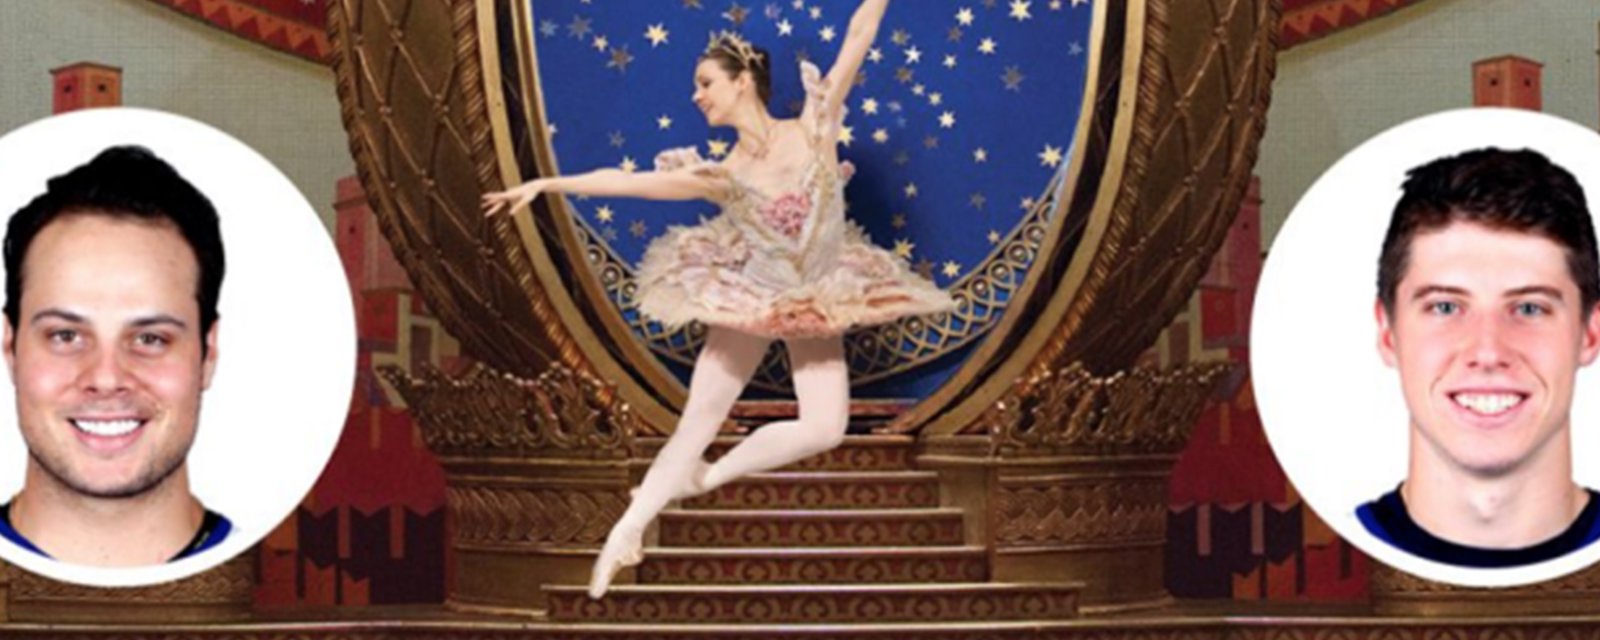 Matthews and Marner to appear in The Nutcracker for the National Ballet of Canada